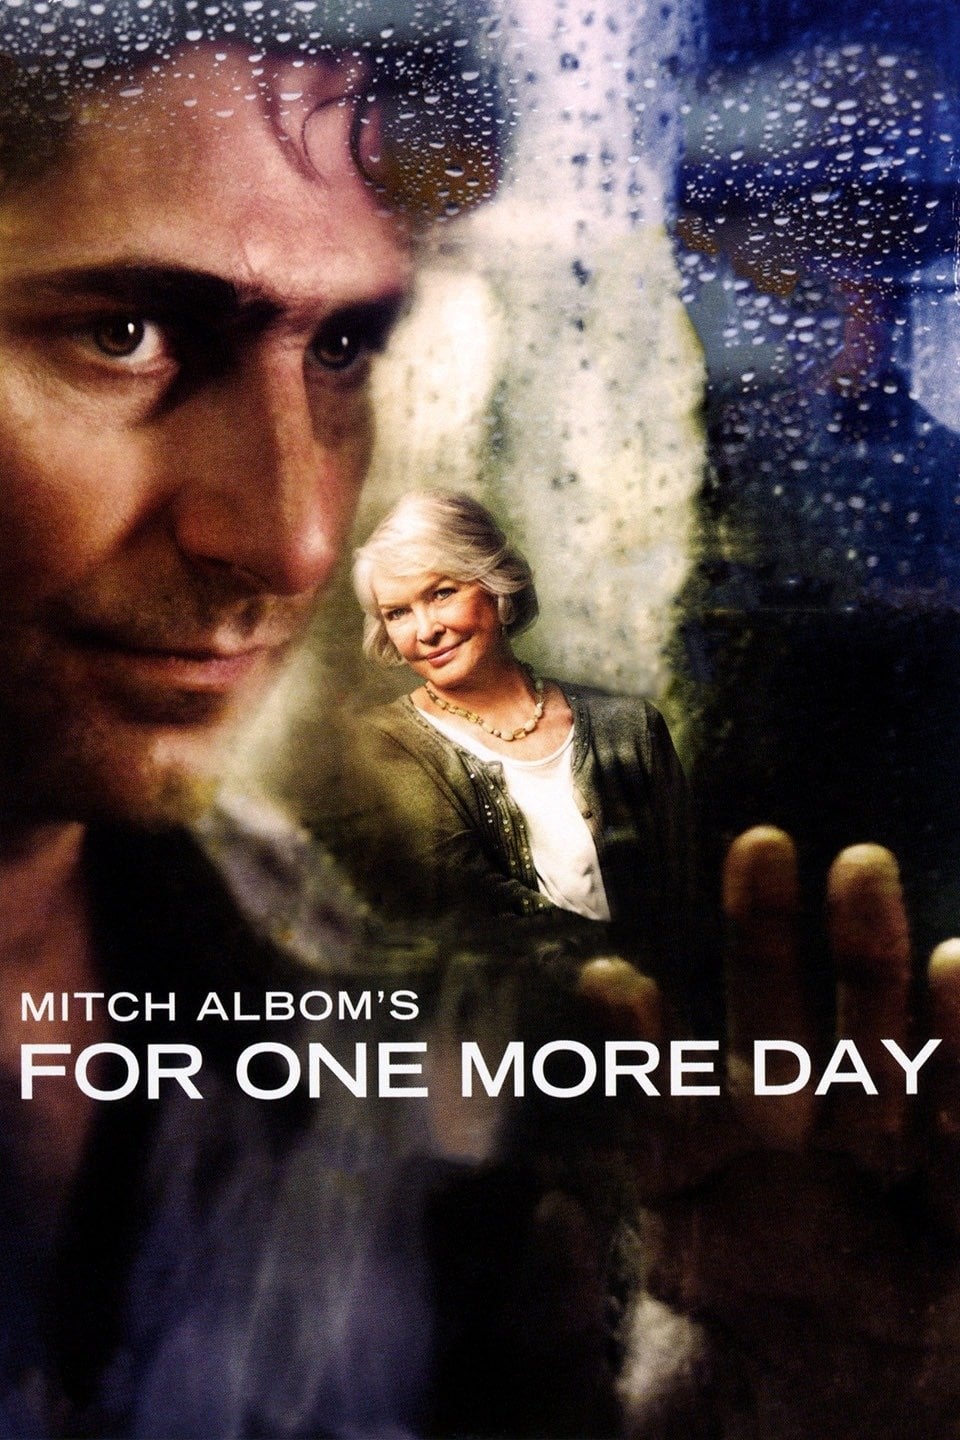 Mitch Albom's For One More Day